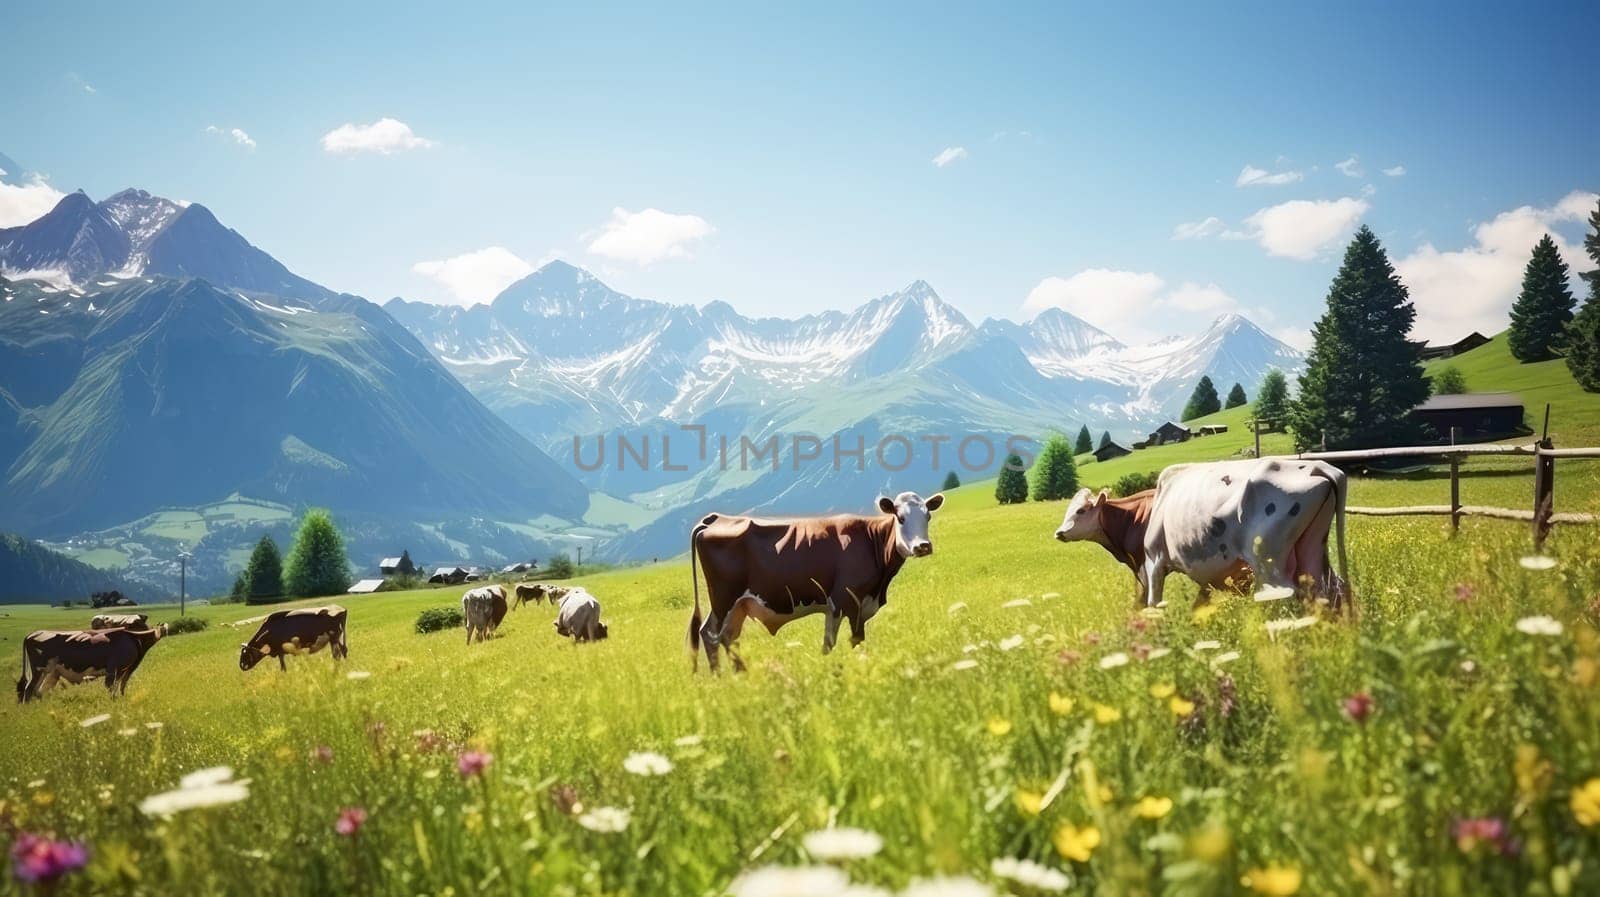 Cows graze in alpine meadows with wildflowers near the mountains. by Alla_Yurtayeva